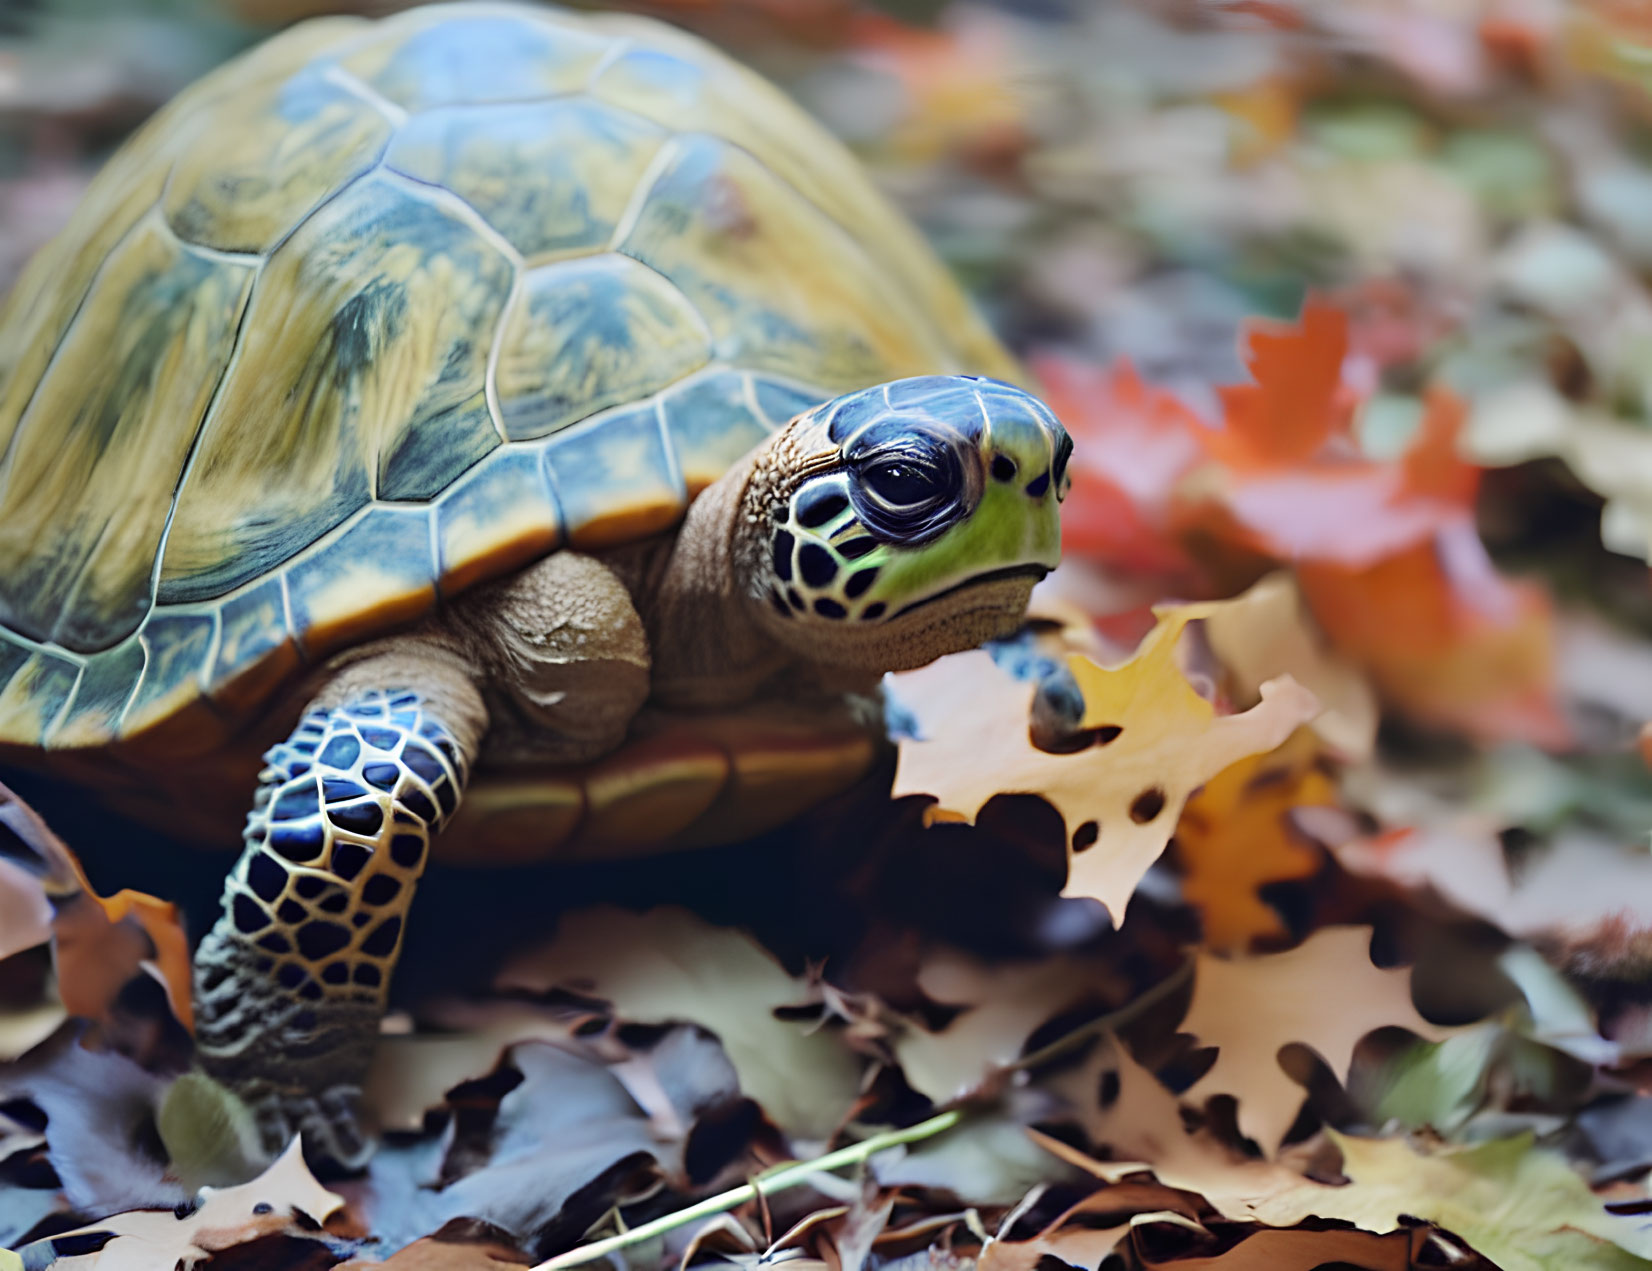 Colorful Tortoise Amid Autumn Leaves with Focused Gaze